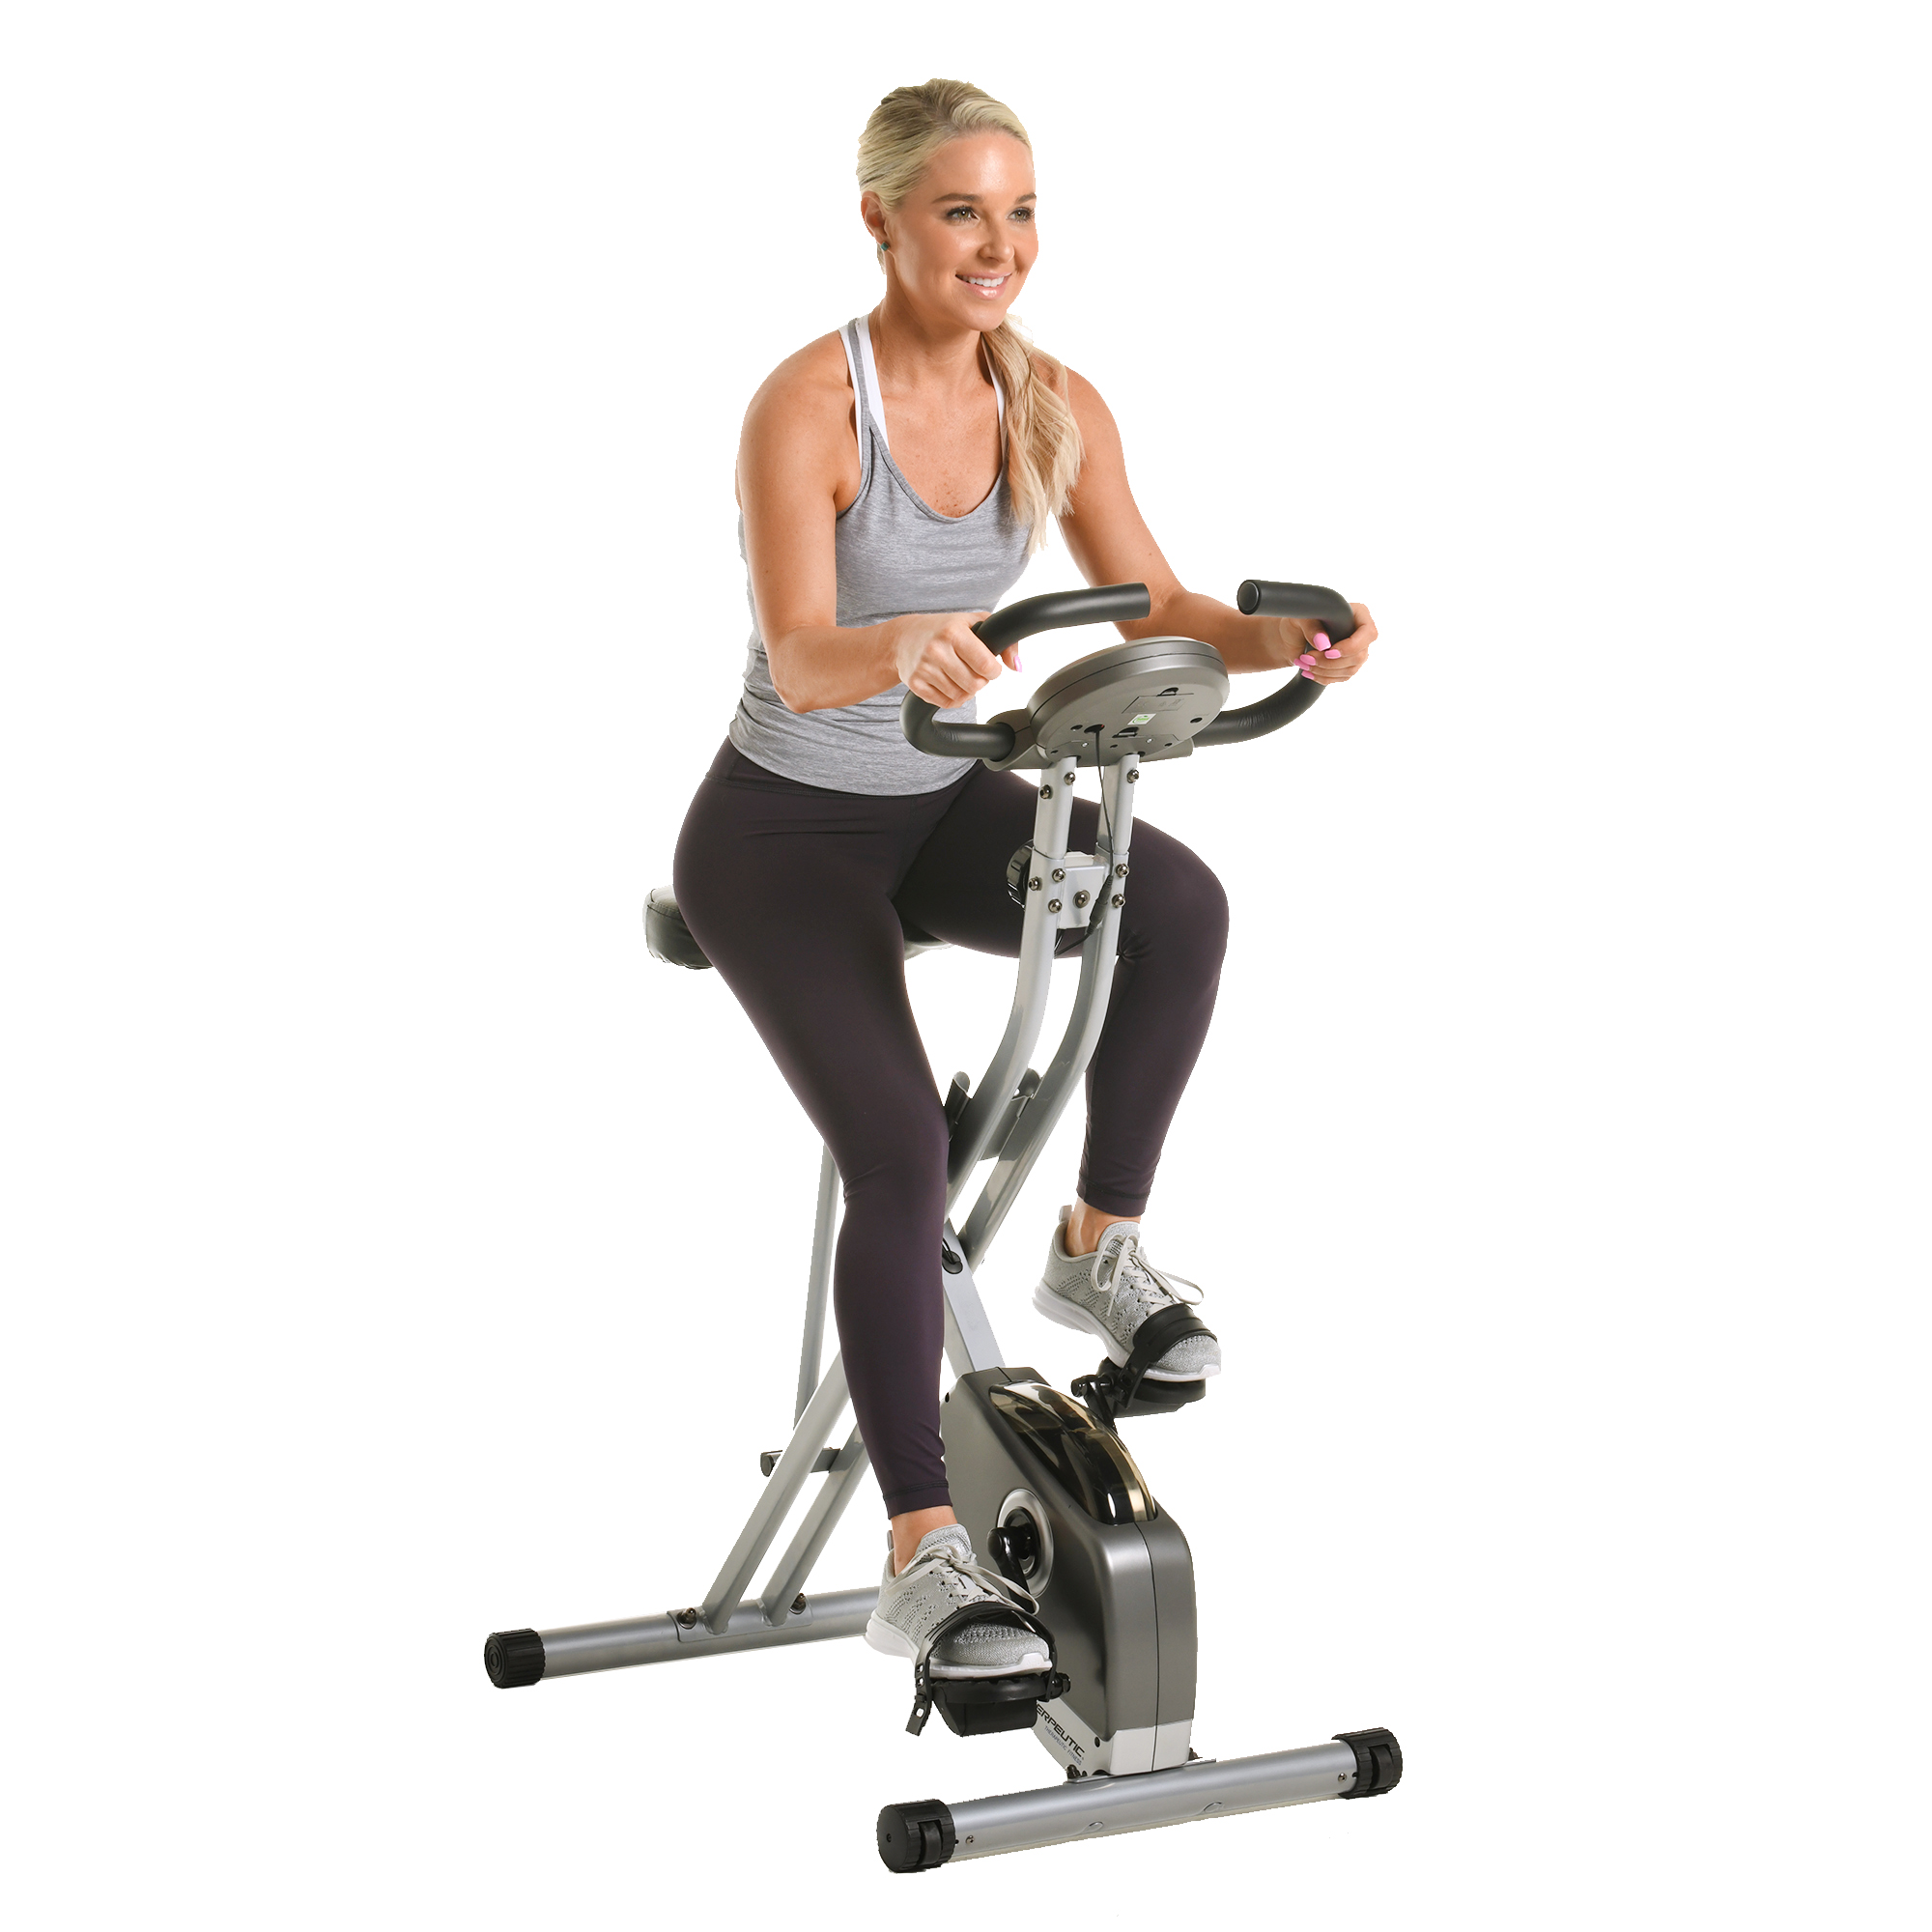 Exerpeutic Exercise Bike, Foldable Magnetic Upright with Heart Pulse Sensors and LCD Monitor, Cardio Fitness, 300lbs Weight Capacity - image 3 of 9